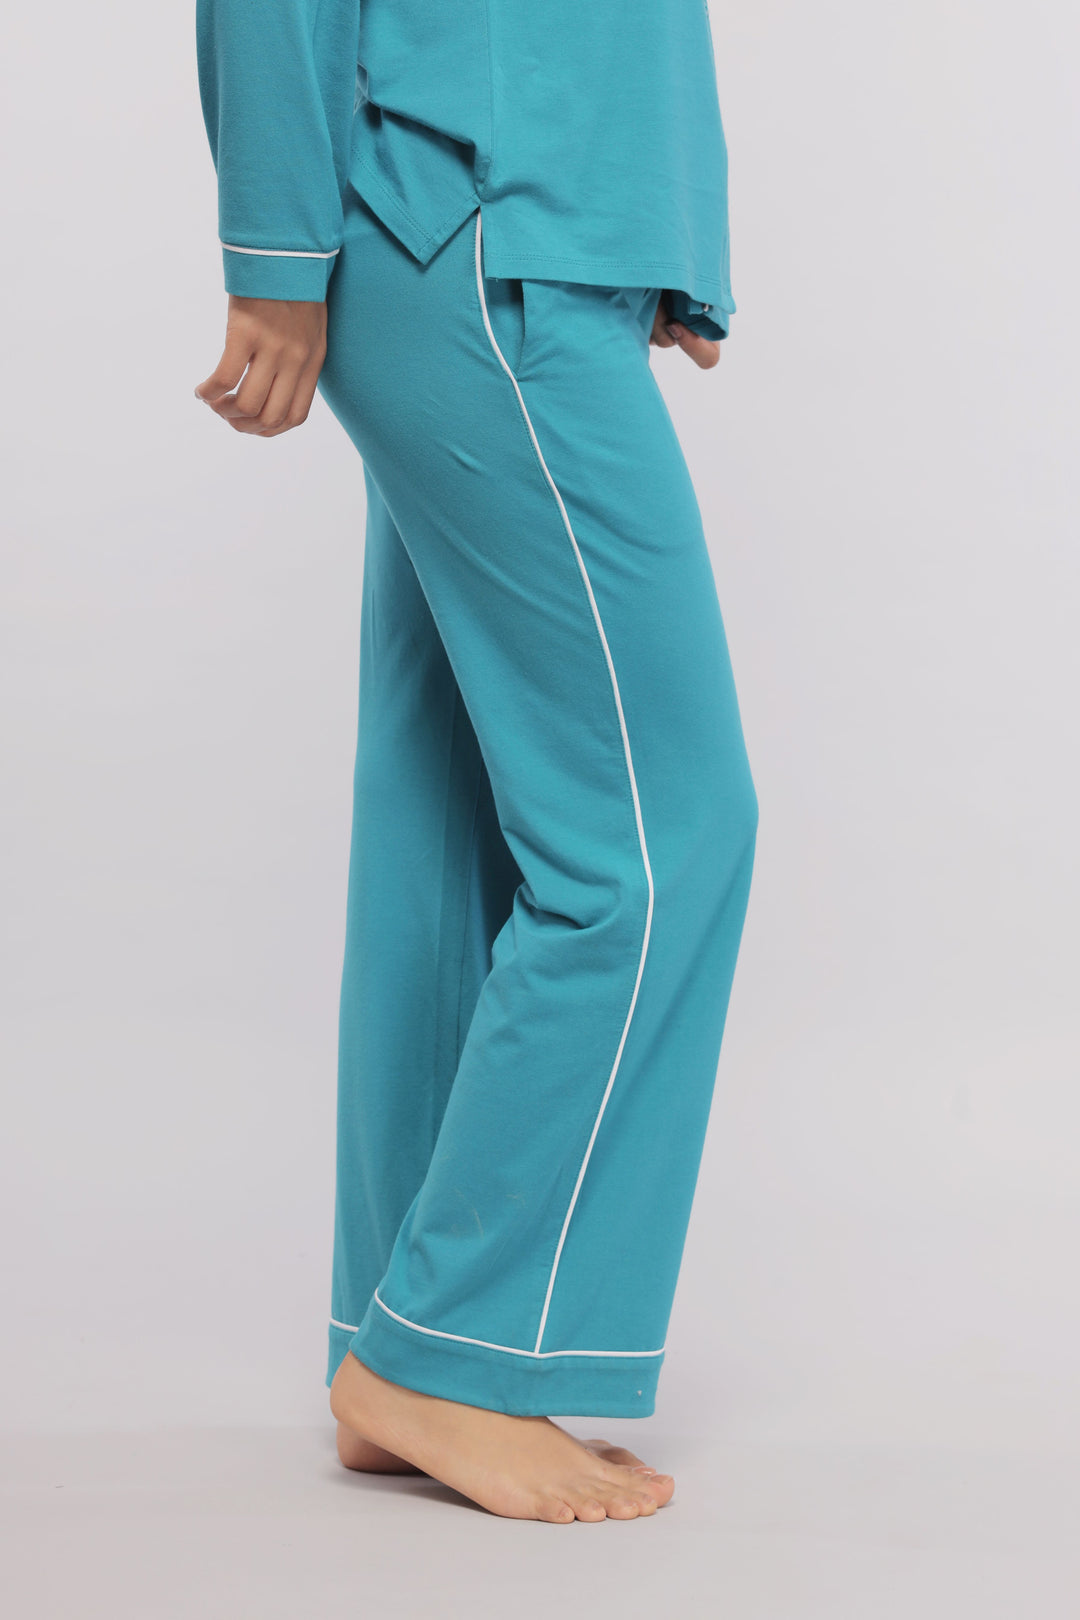 Teal Full Sleeve Button Down Pajama Set